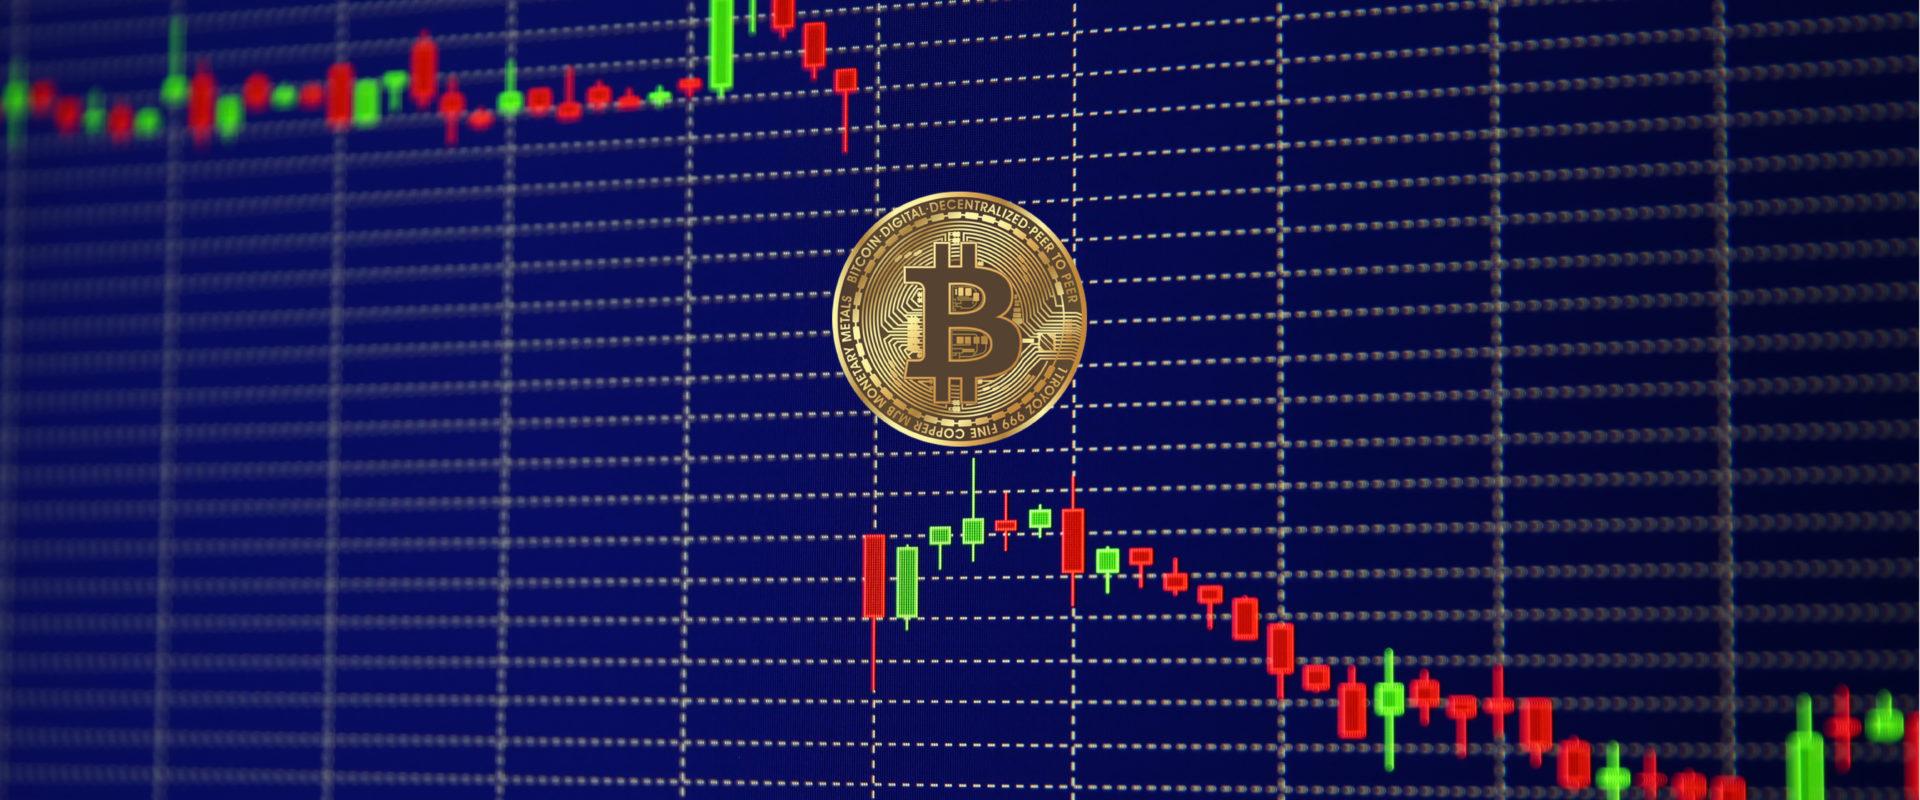 Crypto Market Crash Could Lure in More New Investors to the Market